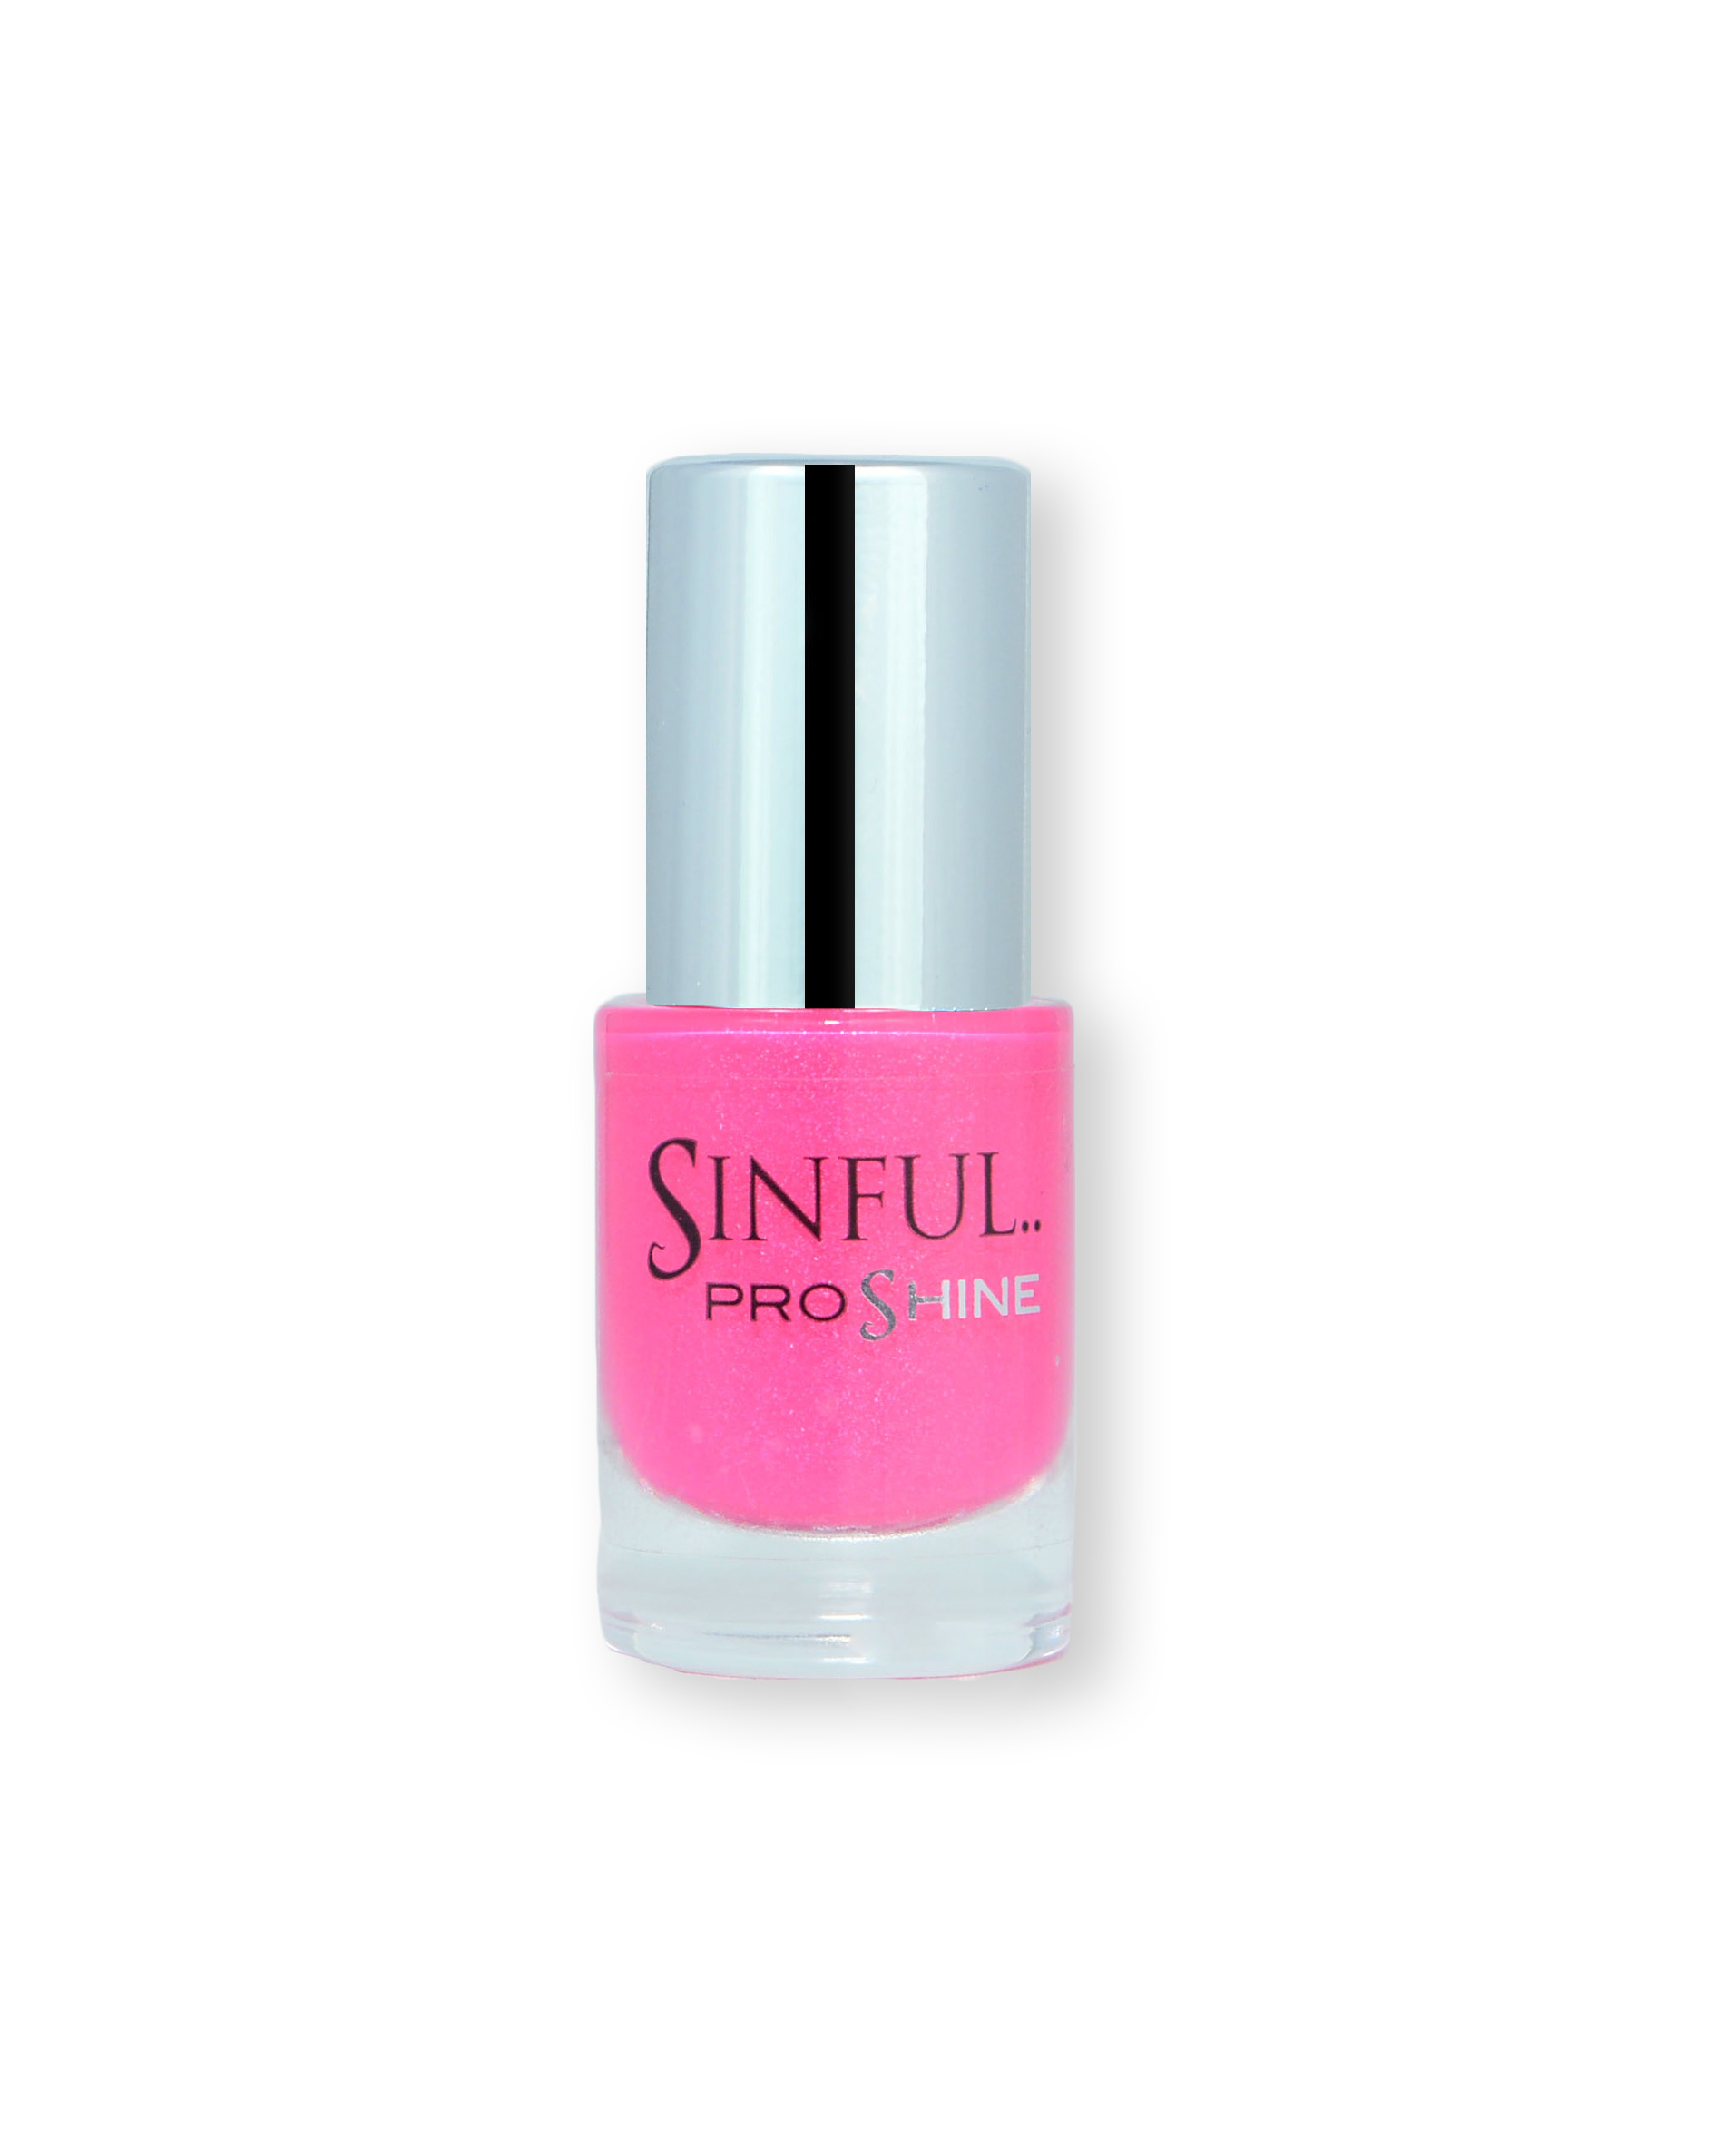 Sinful PROshine is a revolution into top spec imitation gel-like formula, easy application, full coverage and a sleek finish. Spoil yourself with the choice of 42 shades, expertly formulated with the finest grade of pigments. Head Girl: Fuchsia pink with a delicate white shimmer